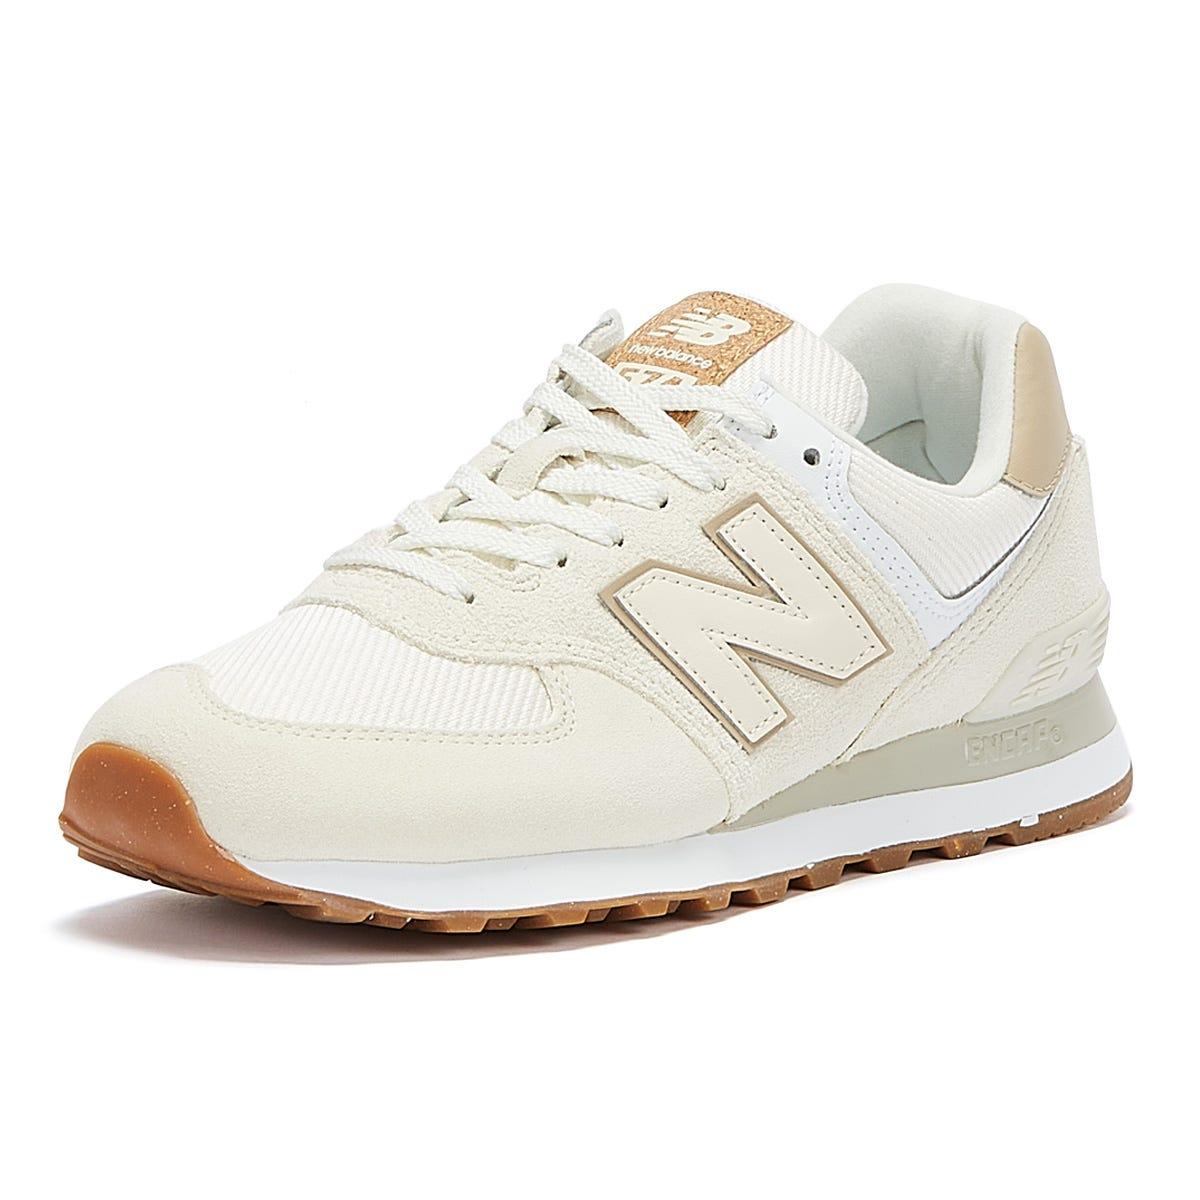 New Balance 574 / Tan Trainers in Beige (Natural) - Lyst